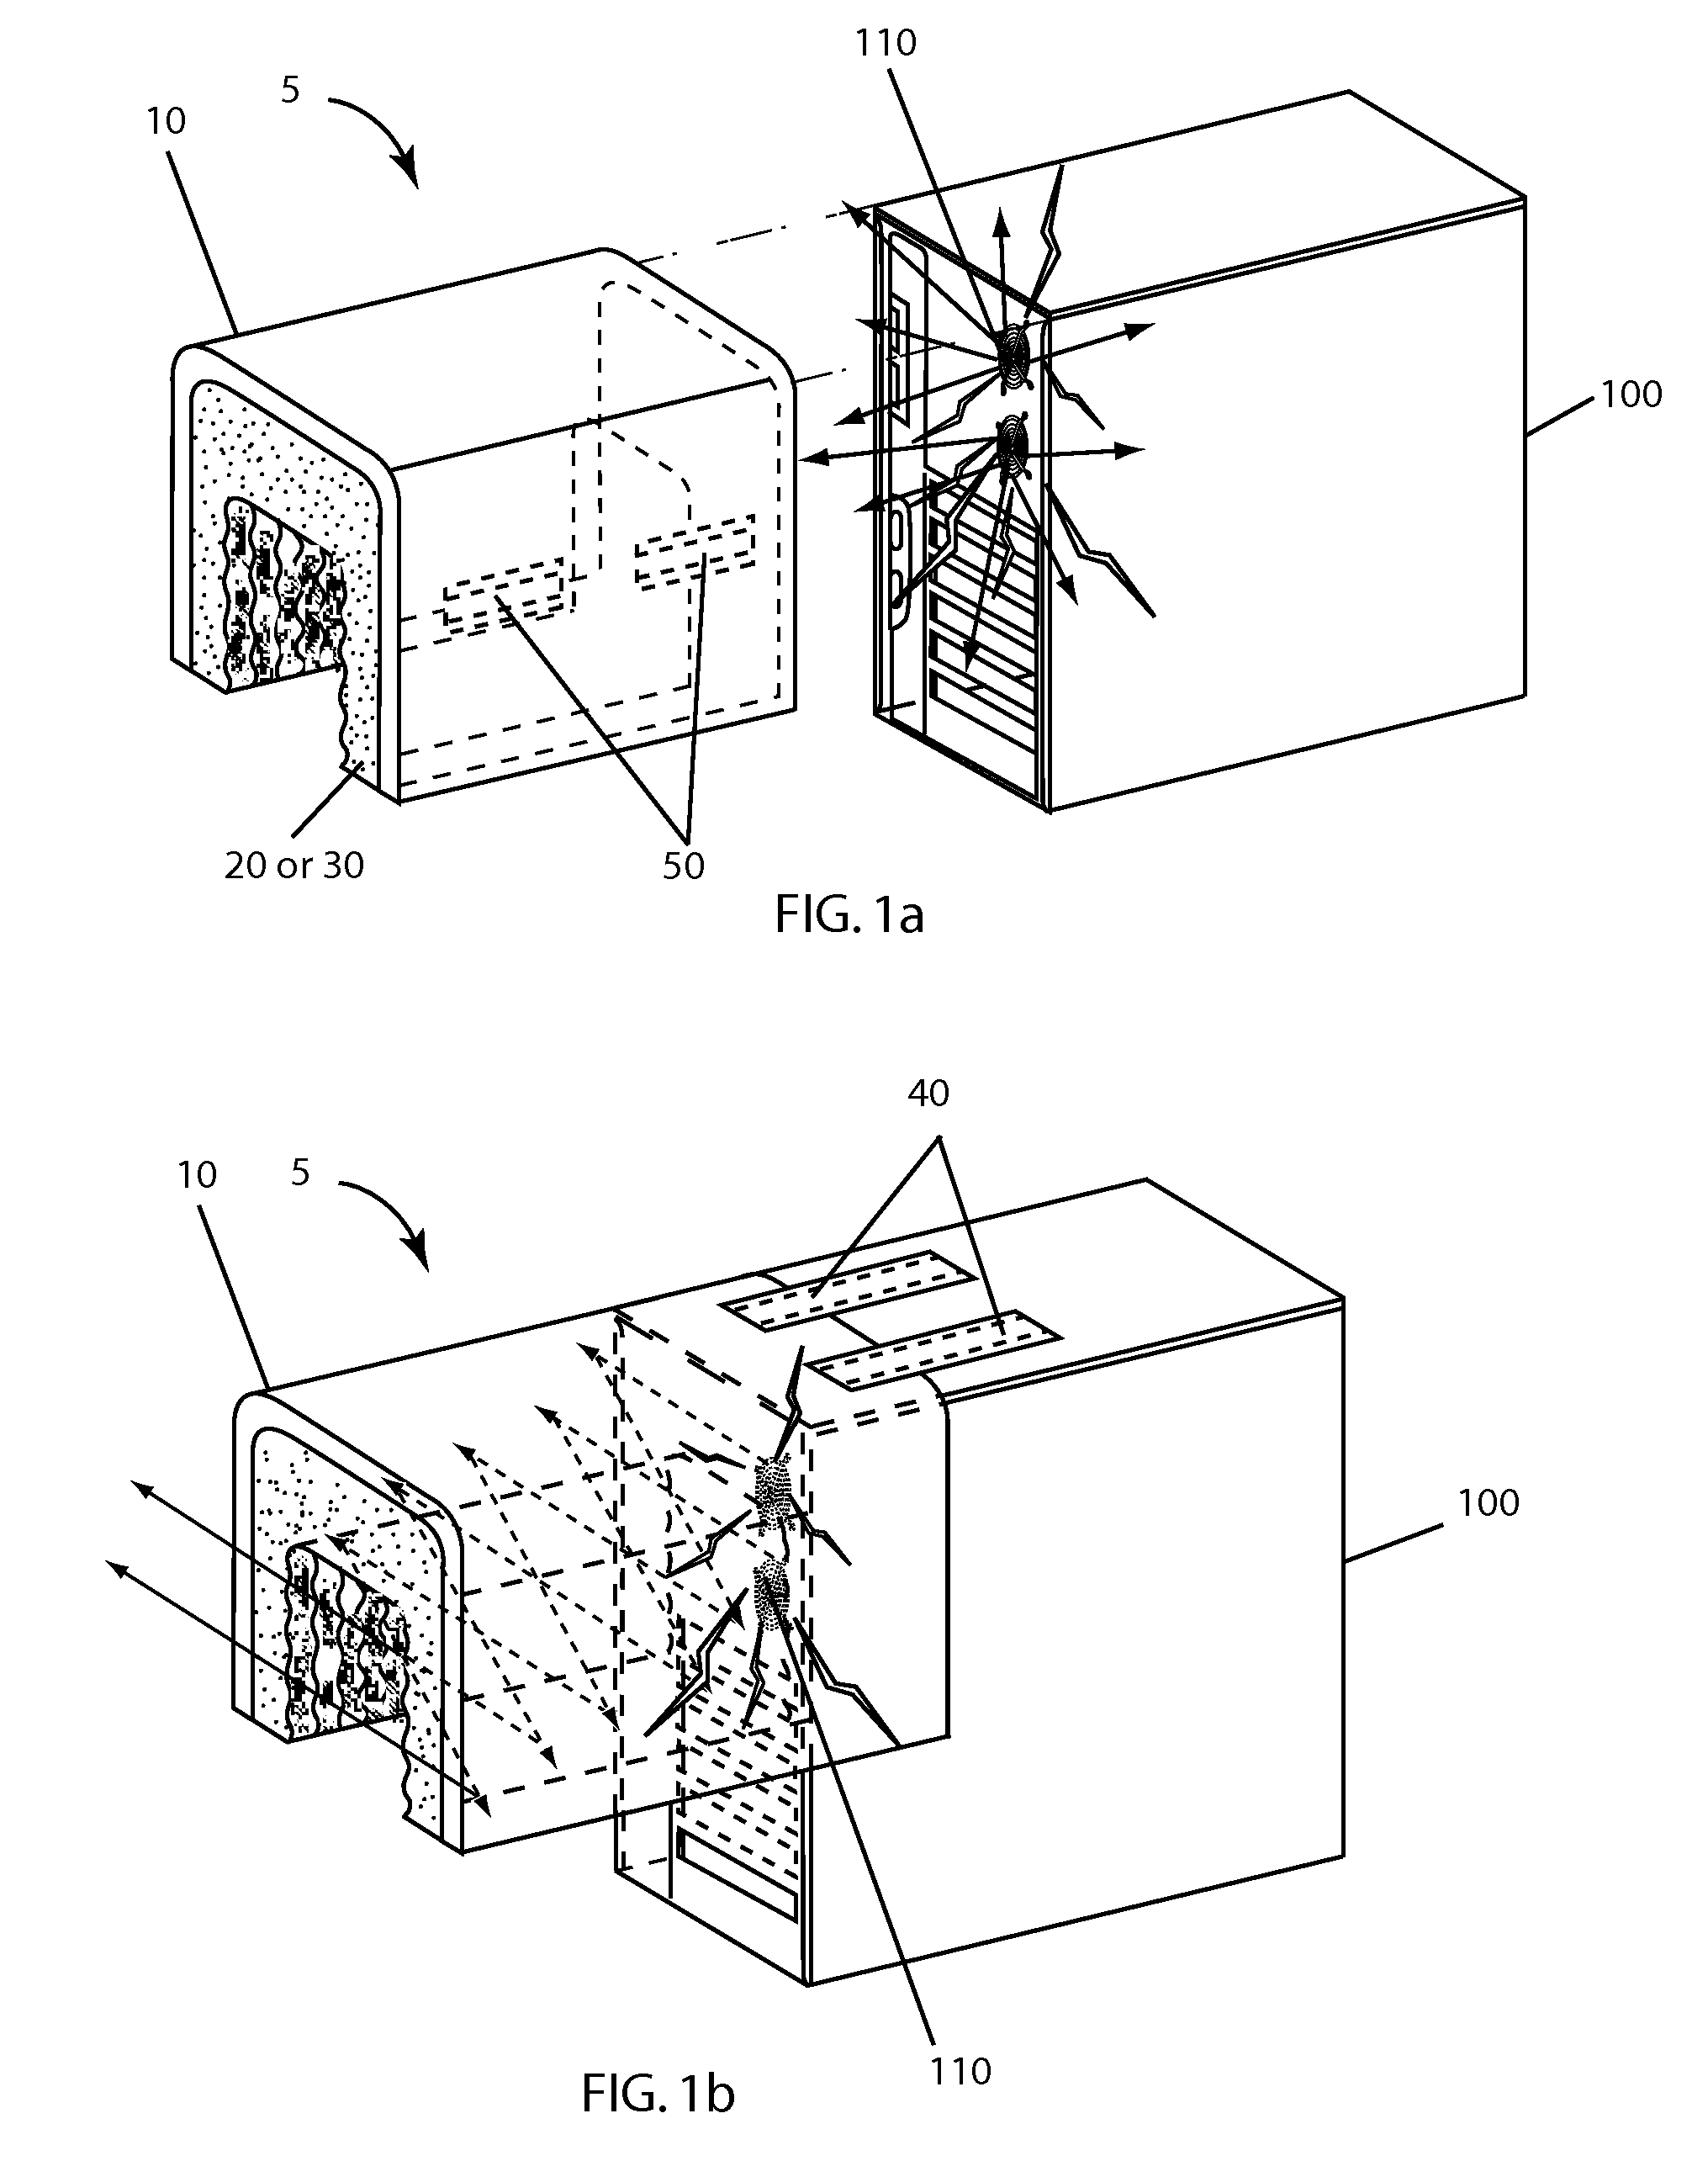 Acoustic noise reduction device for electronic equipment, including personal computers